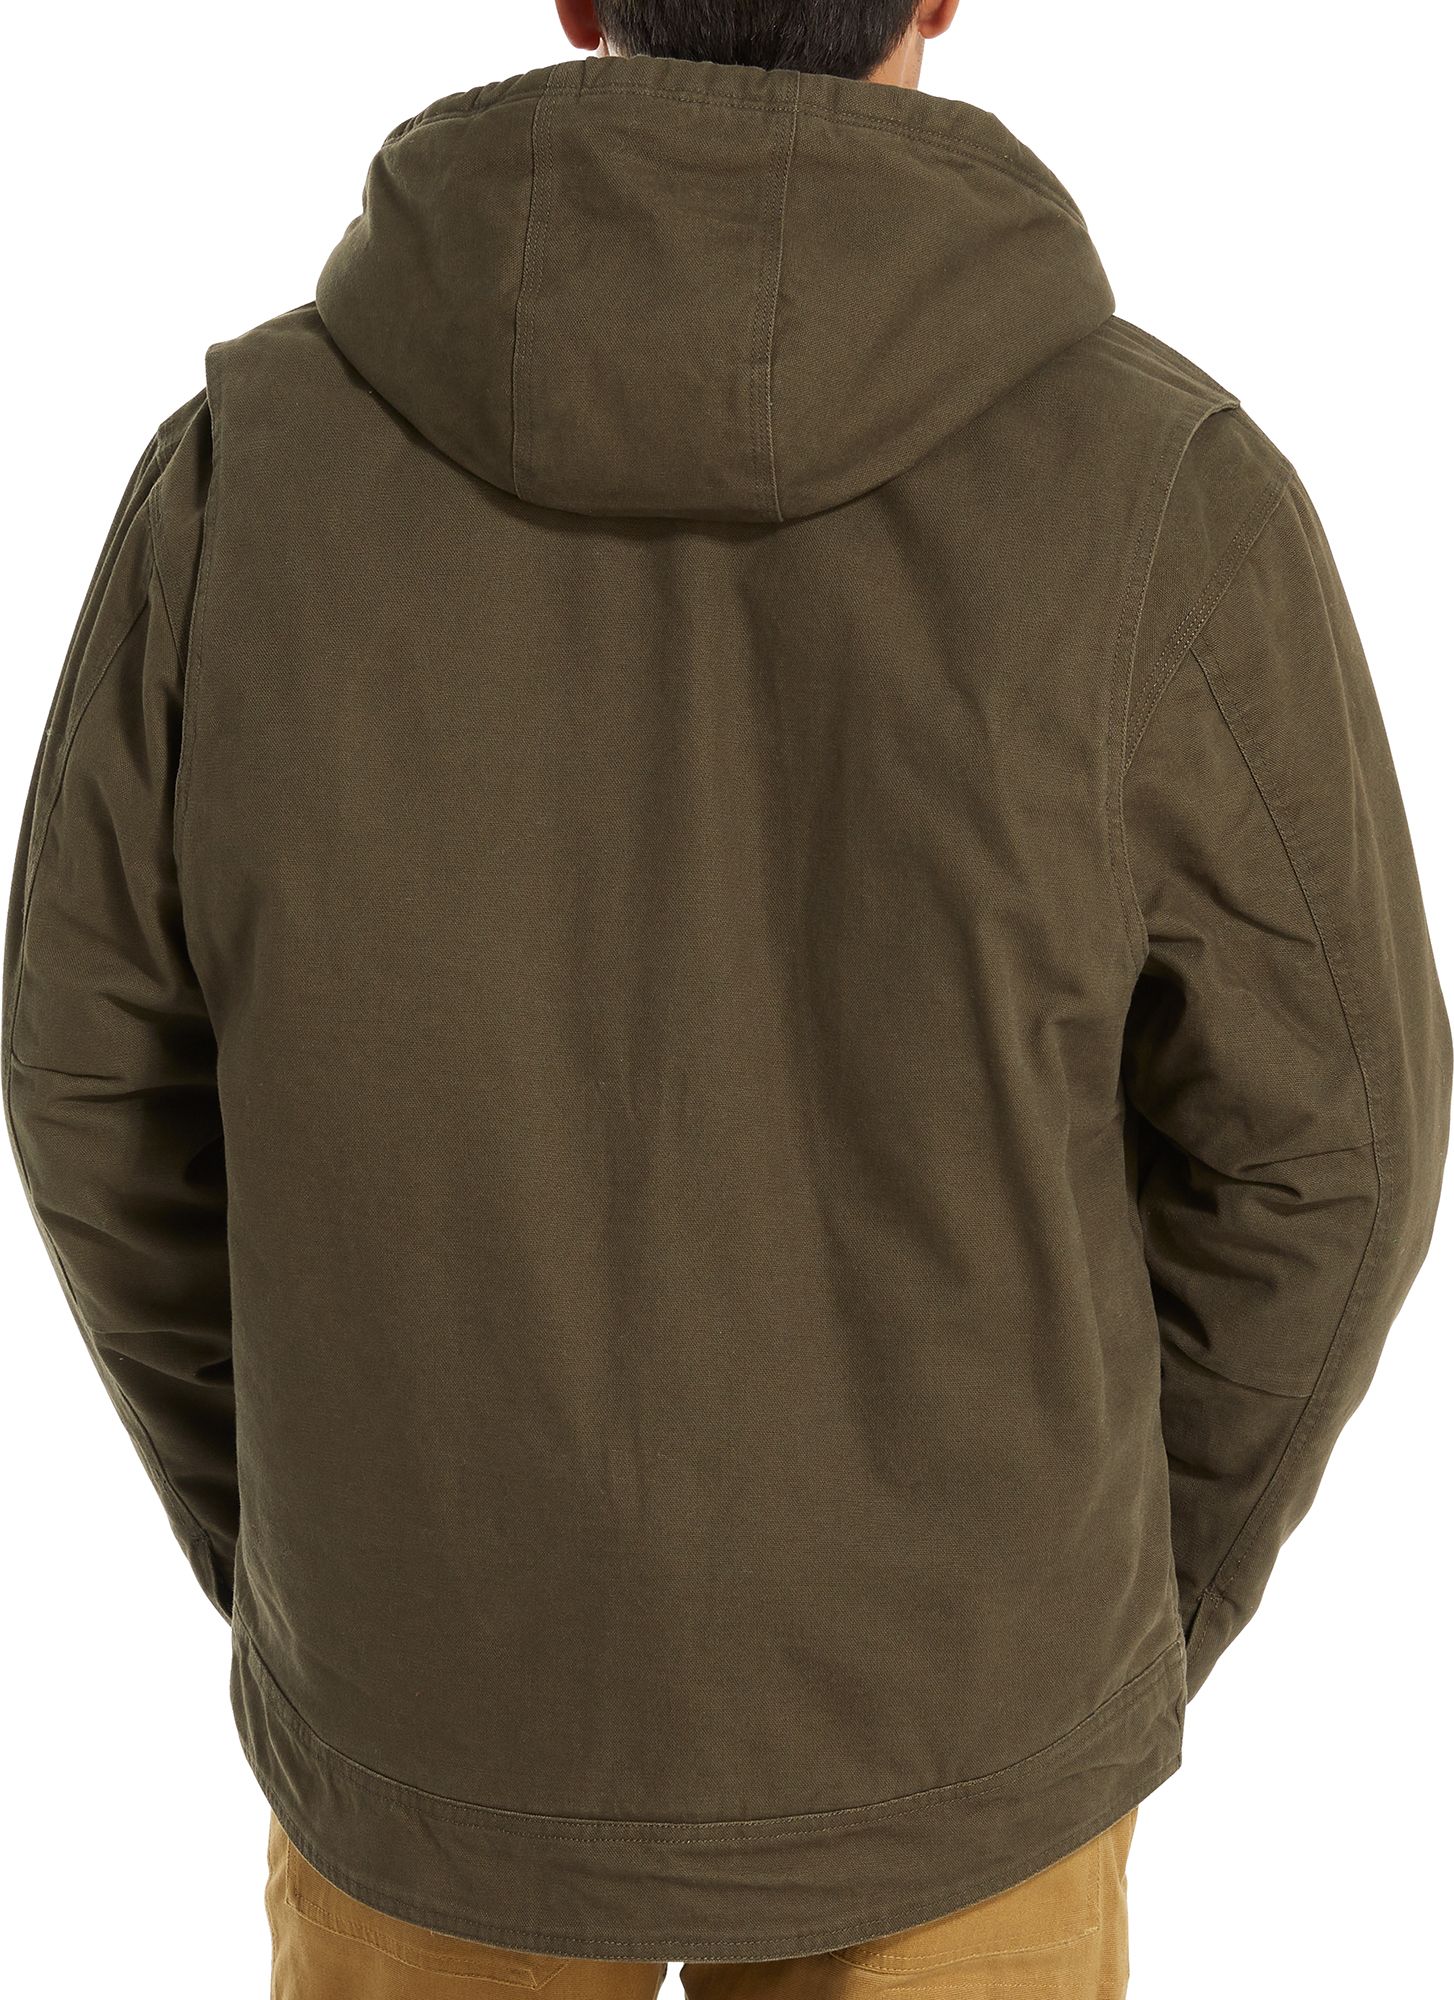 Men's Hooded Jackets  DICK'S Sporting Goods